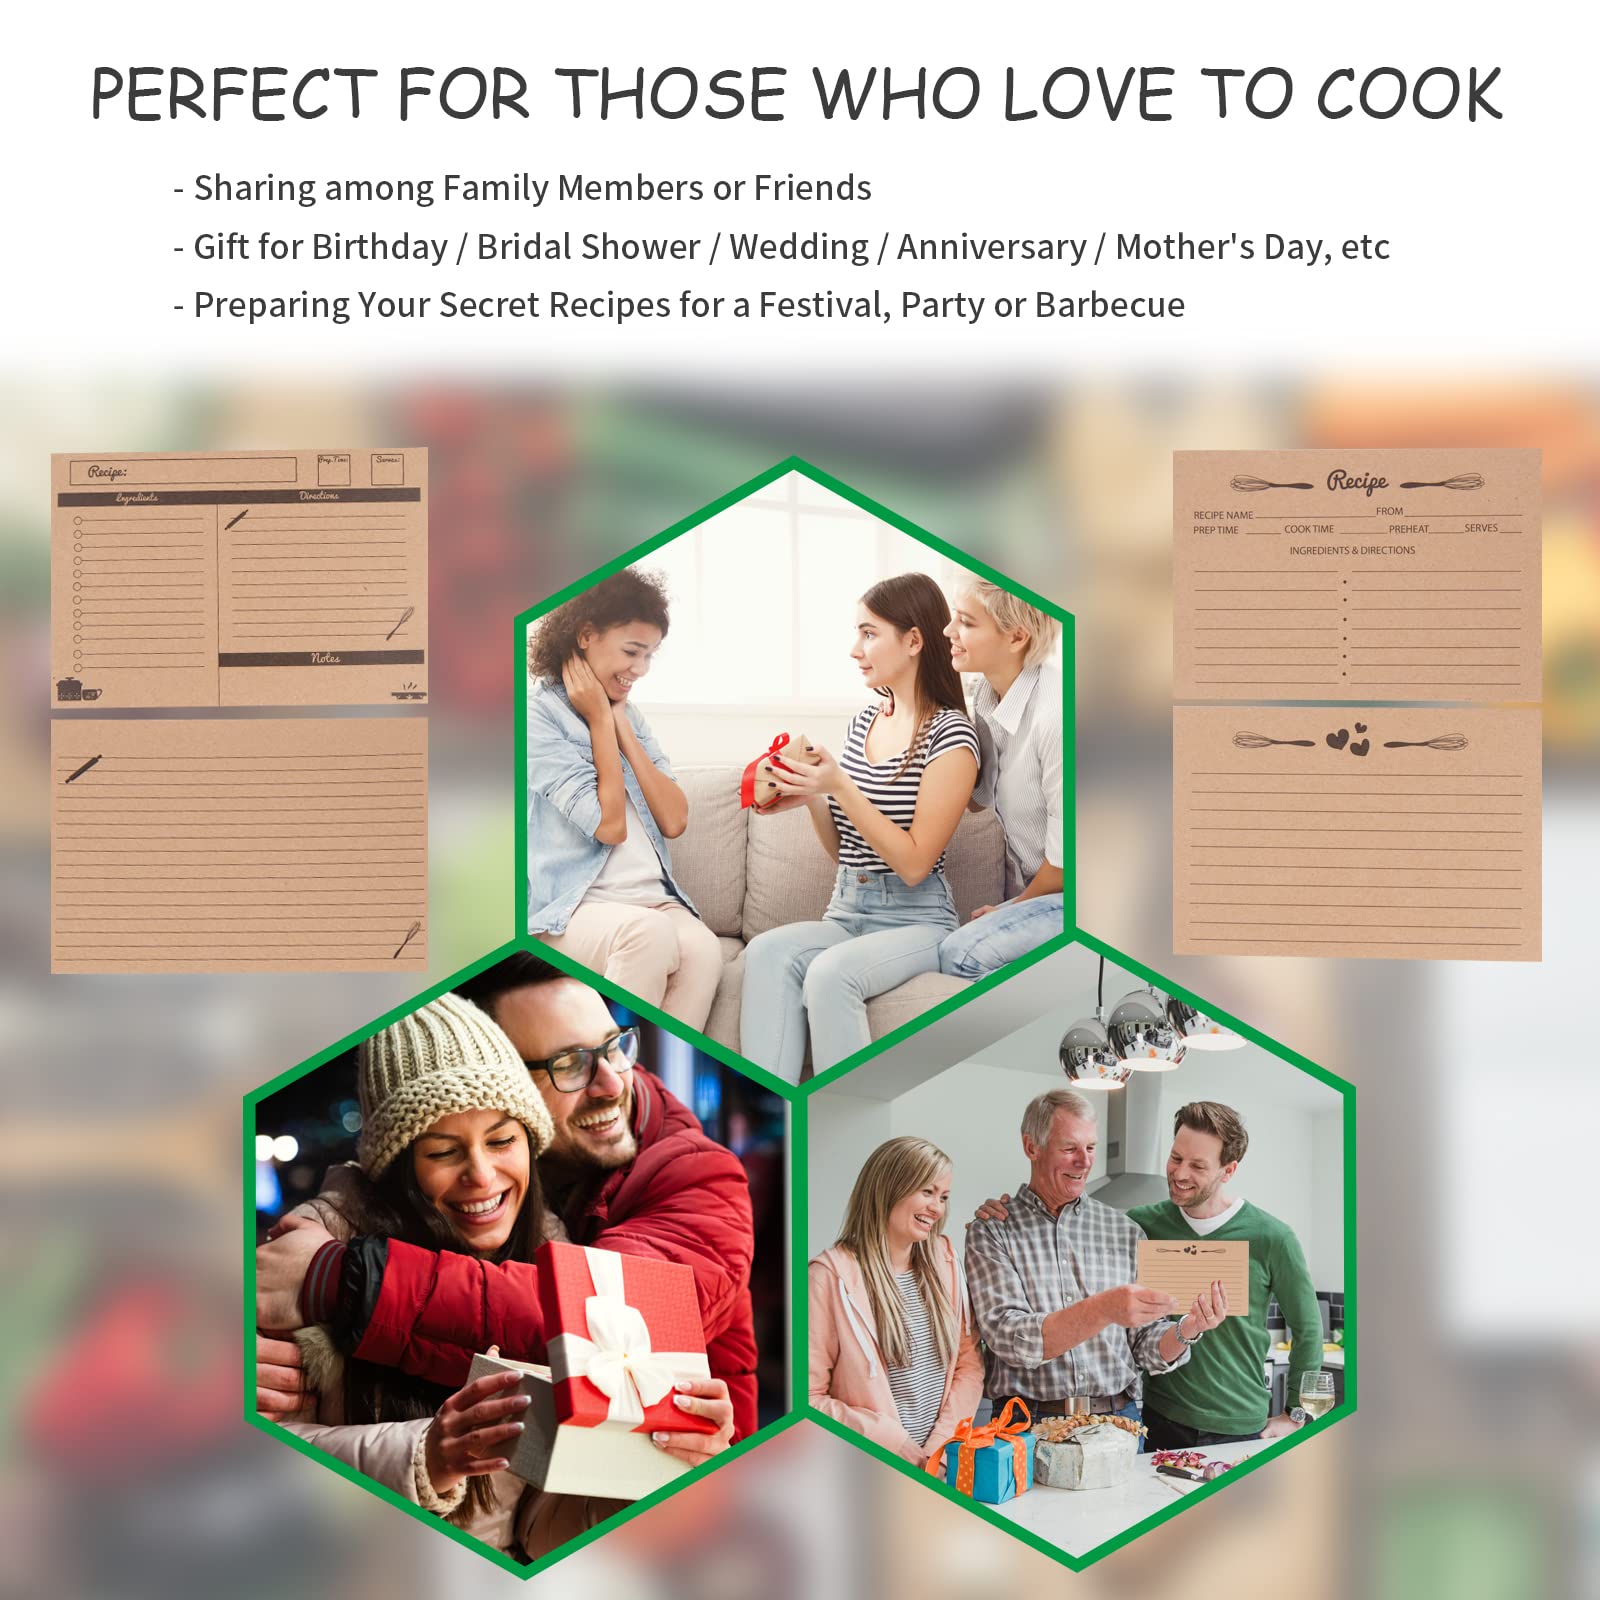 80 Count Recipe Cards 4x6 Inches, Thick Craft Paper Blank Double Sided, Classic Style, for Barbecues, Bridal Showers, or Housewarming Parties (2 Designs 40pcs each)